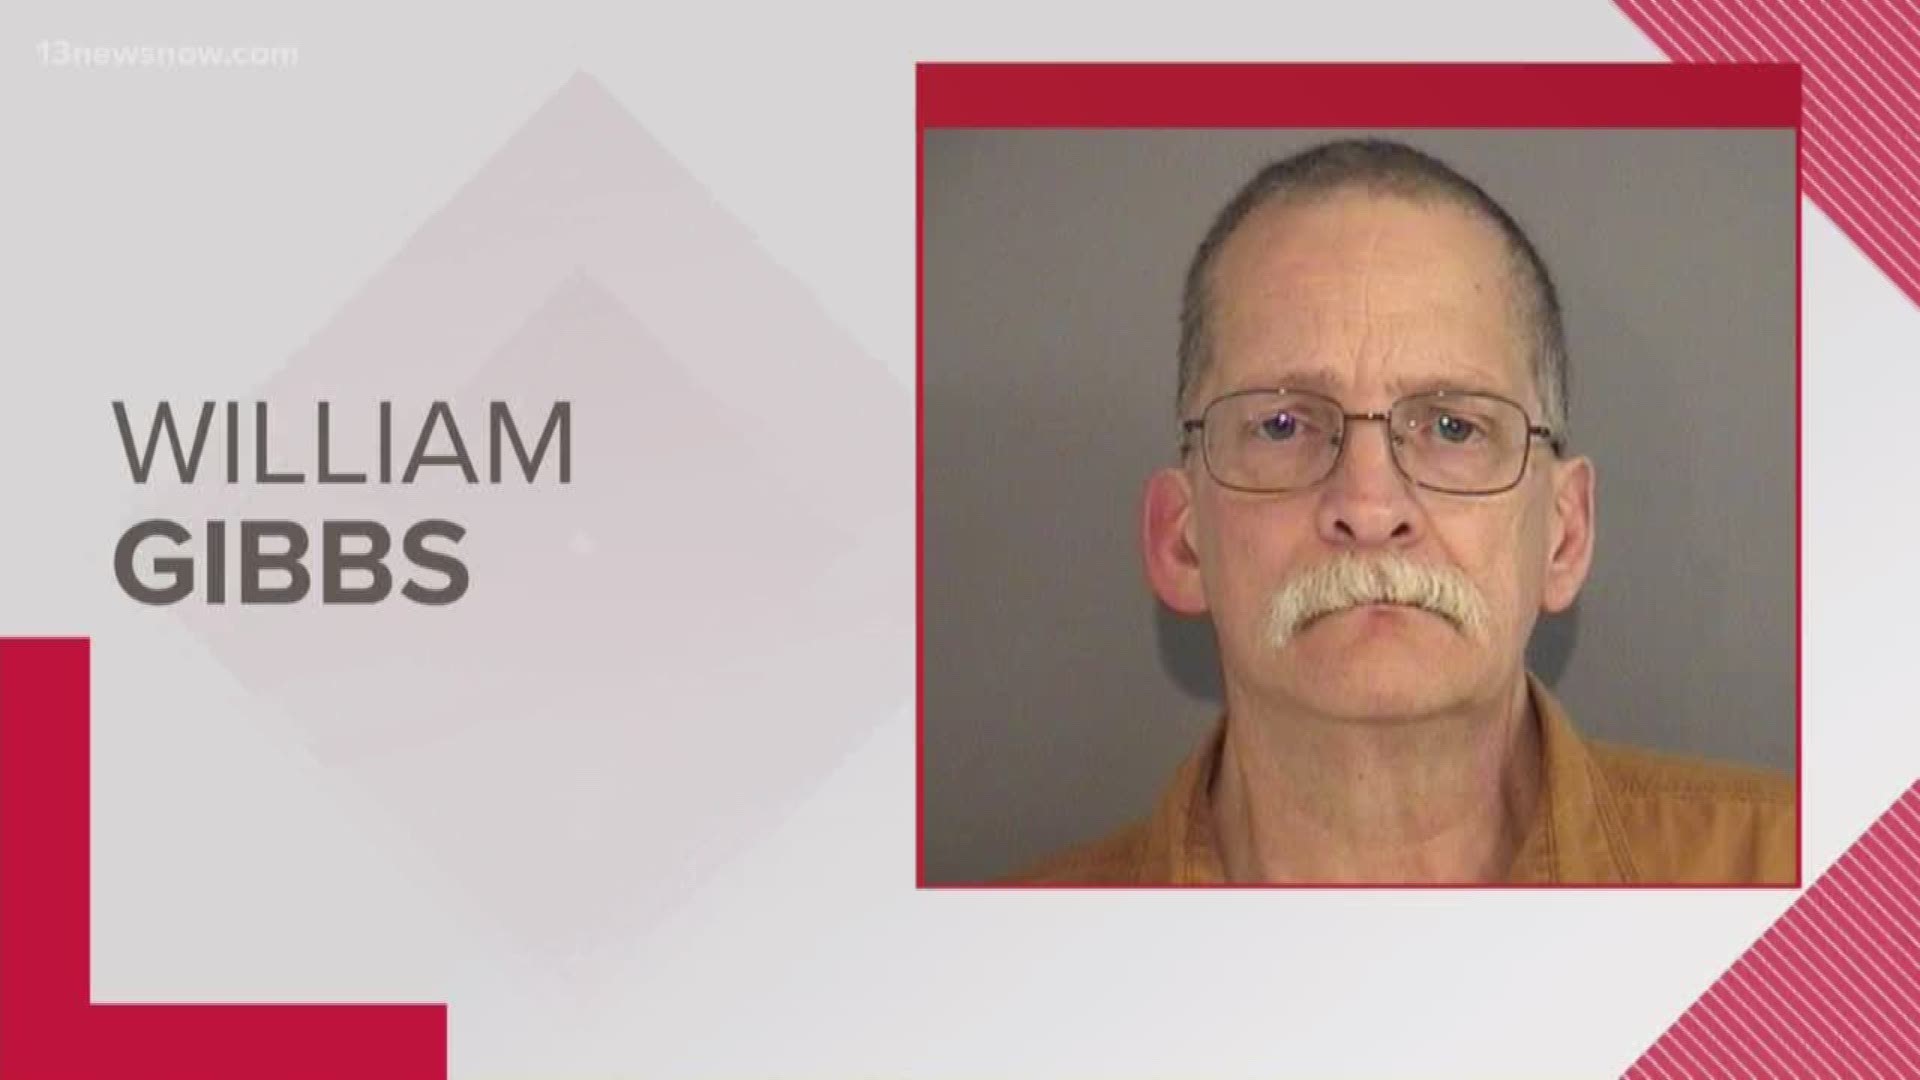 William Gibbs, who used to investigate child porn for James City County, was arrested on child porn charges. Four cyber tips were submitted about Gibbs.